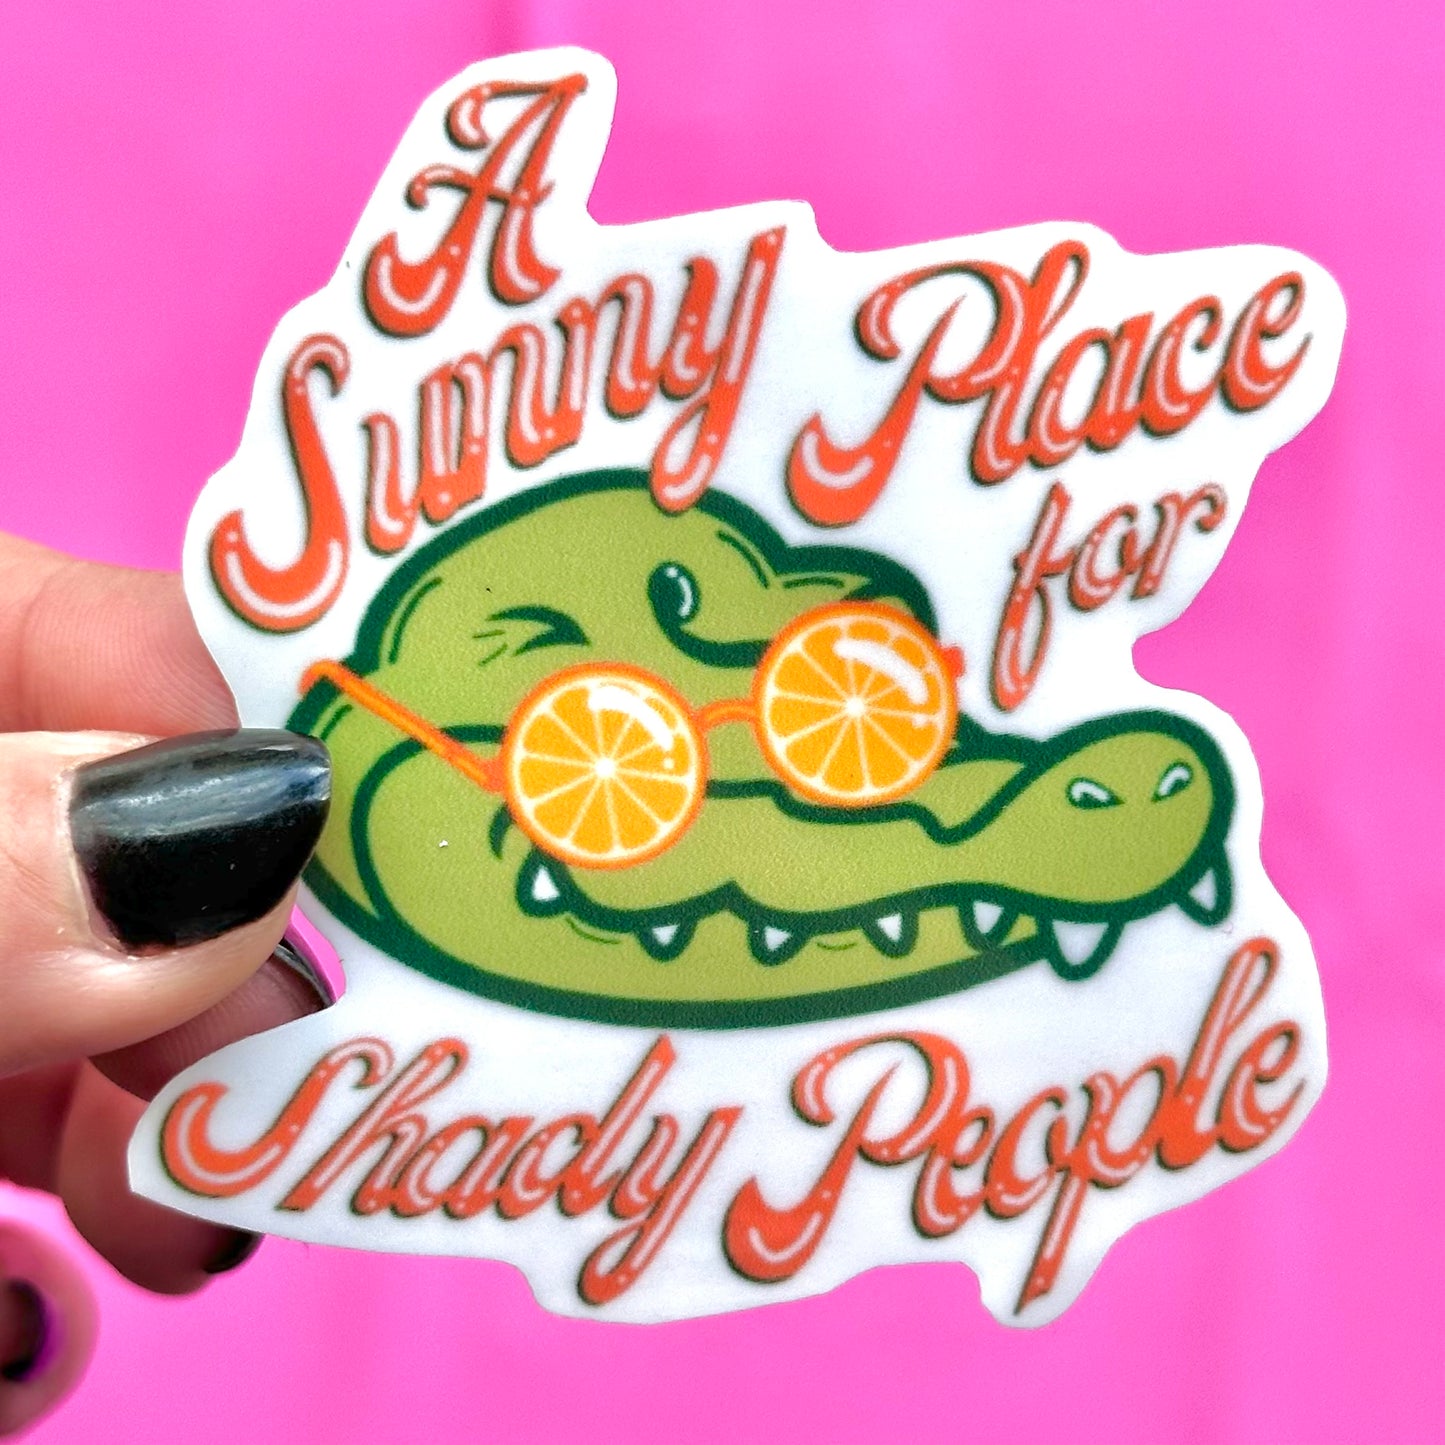 A sunny place for shady people Stickers